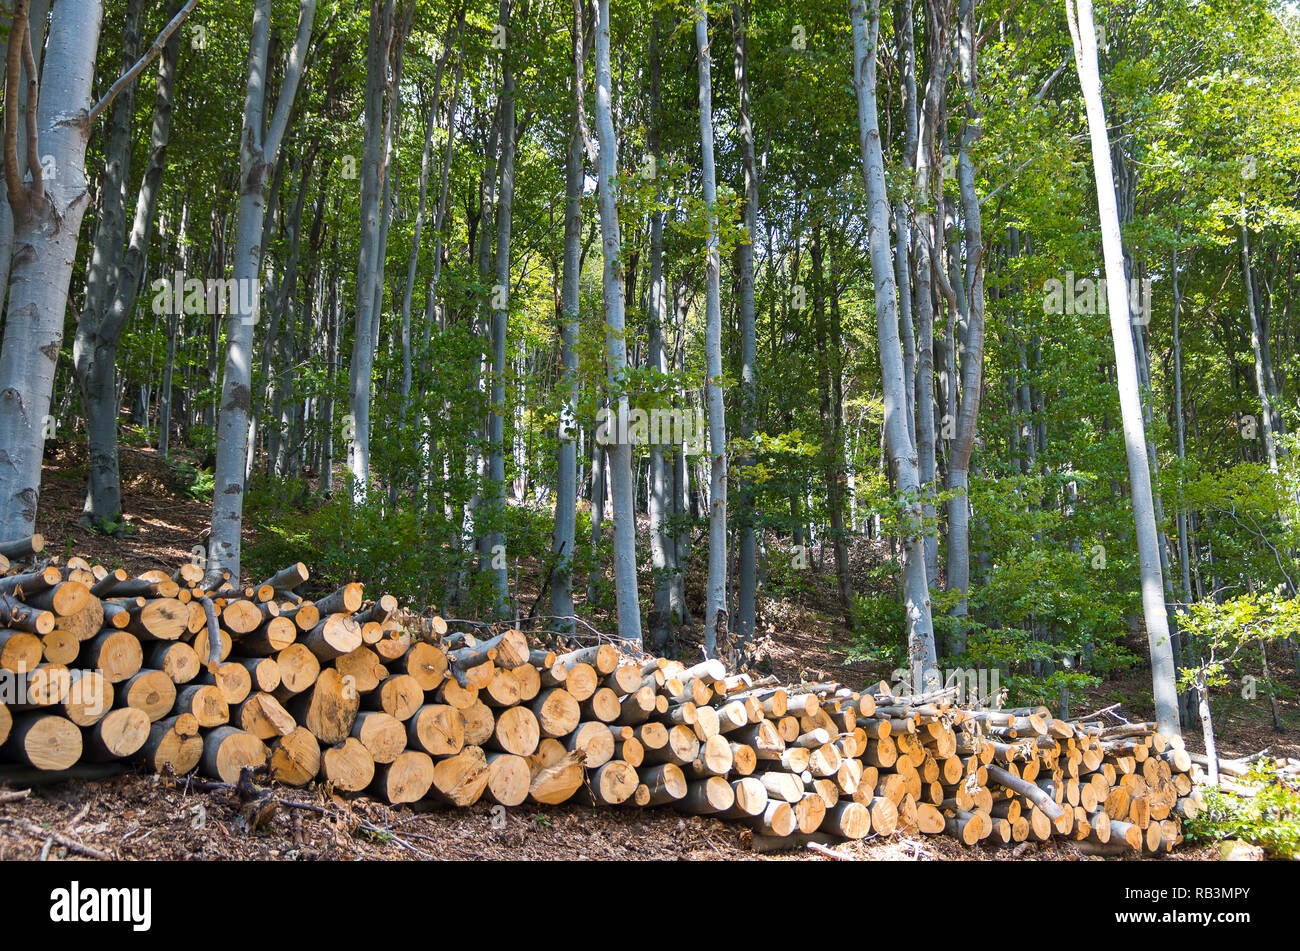 Beech Forest. Pile of wood logs on the edge of the forest. Stock Photo